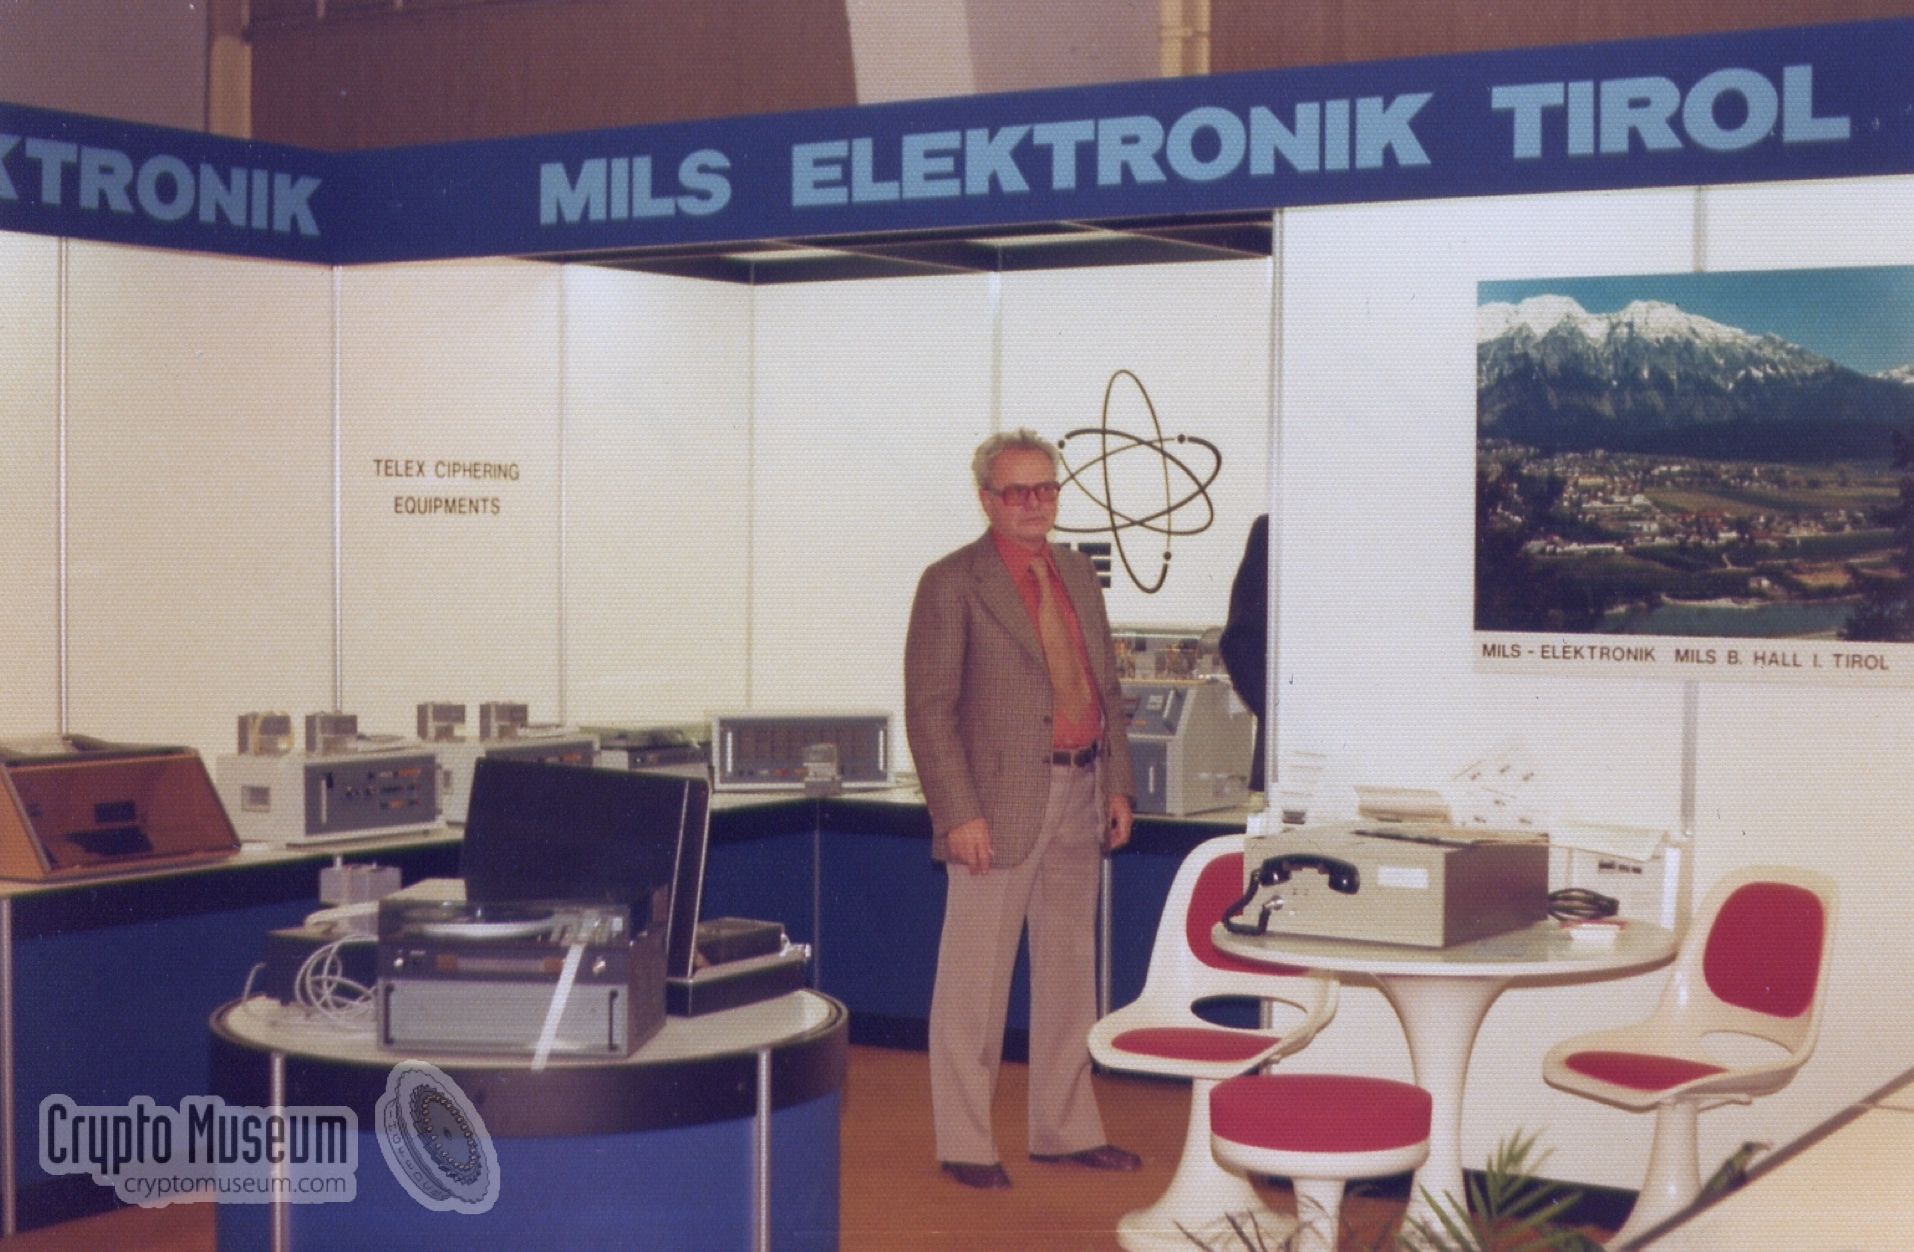 Willi Reichert at the Telecom conference in Geneva in 1975. Photograph by Eberhard Scholz [1].